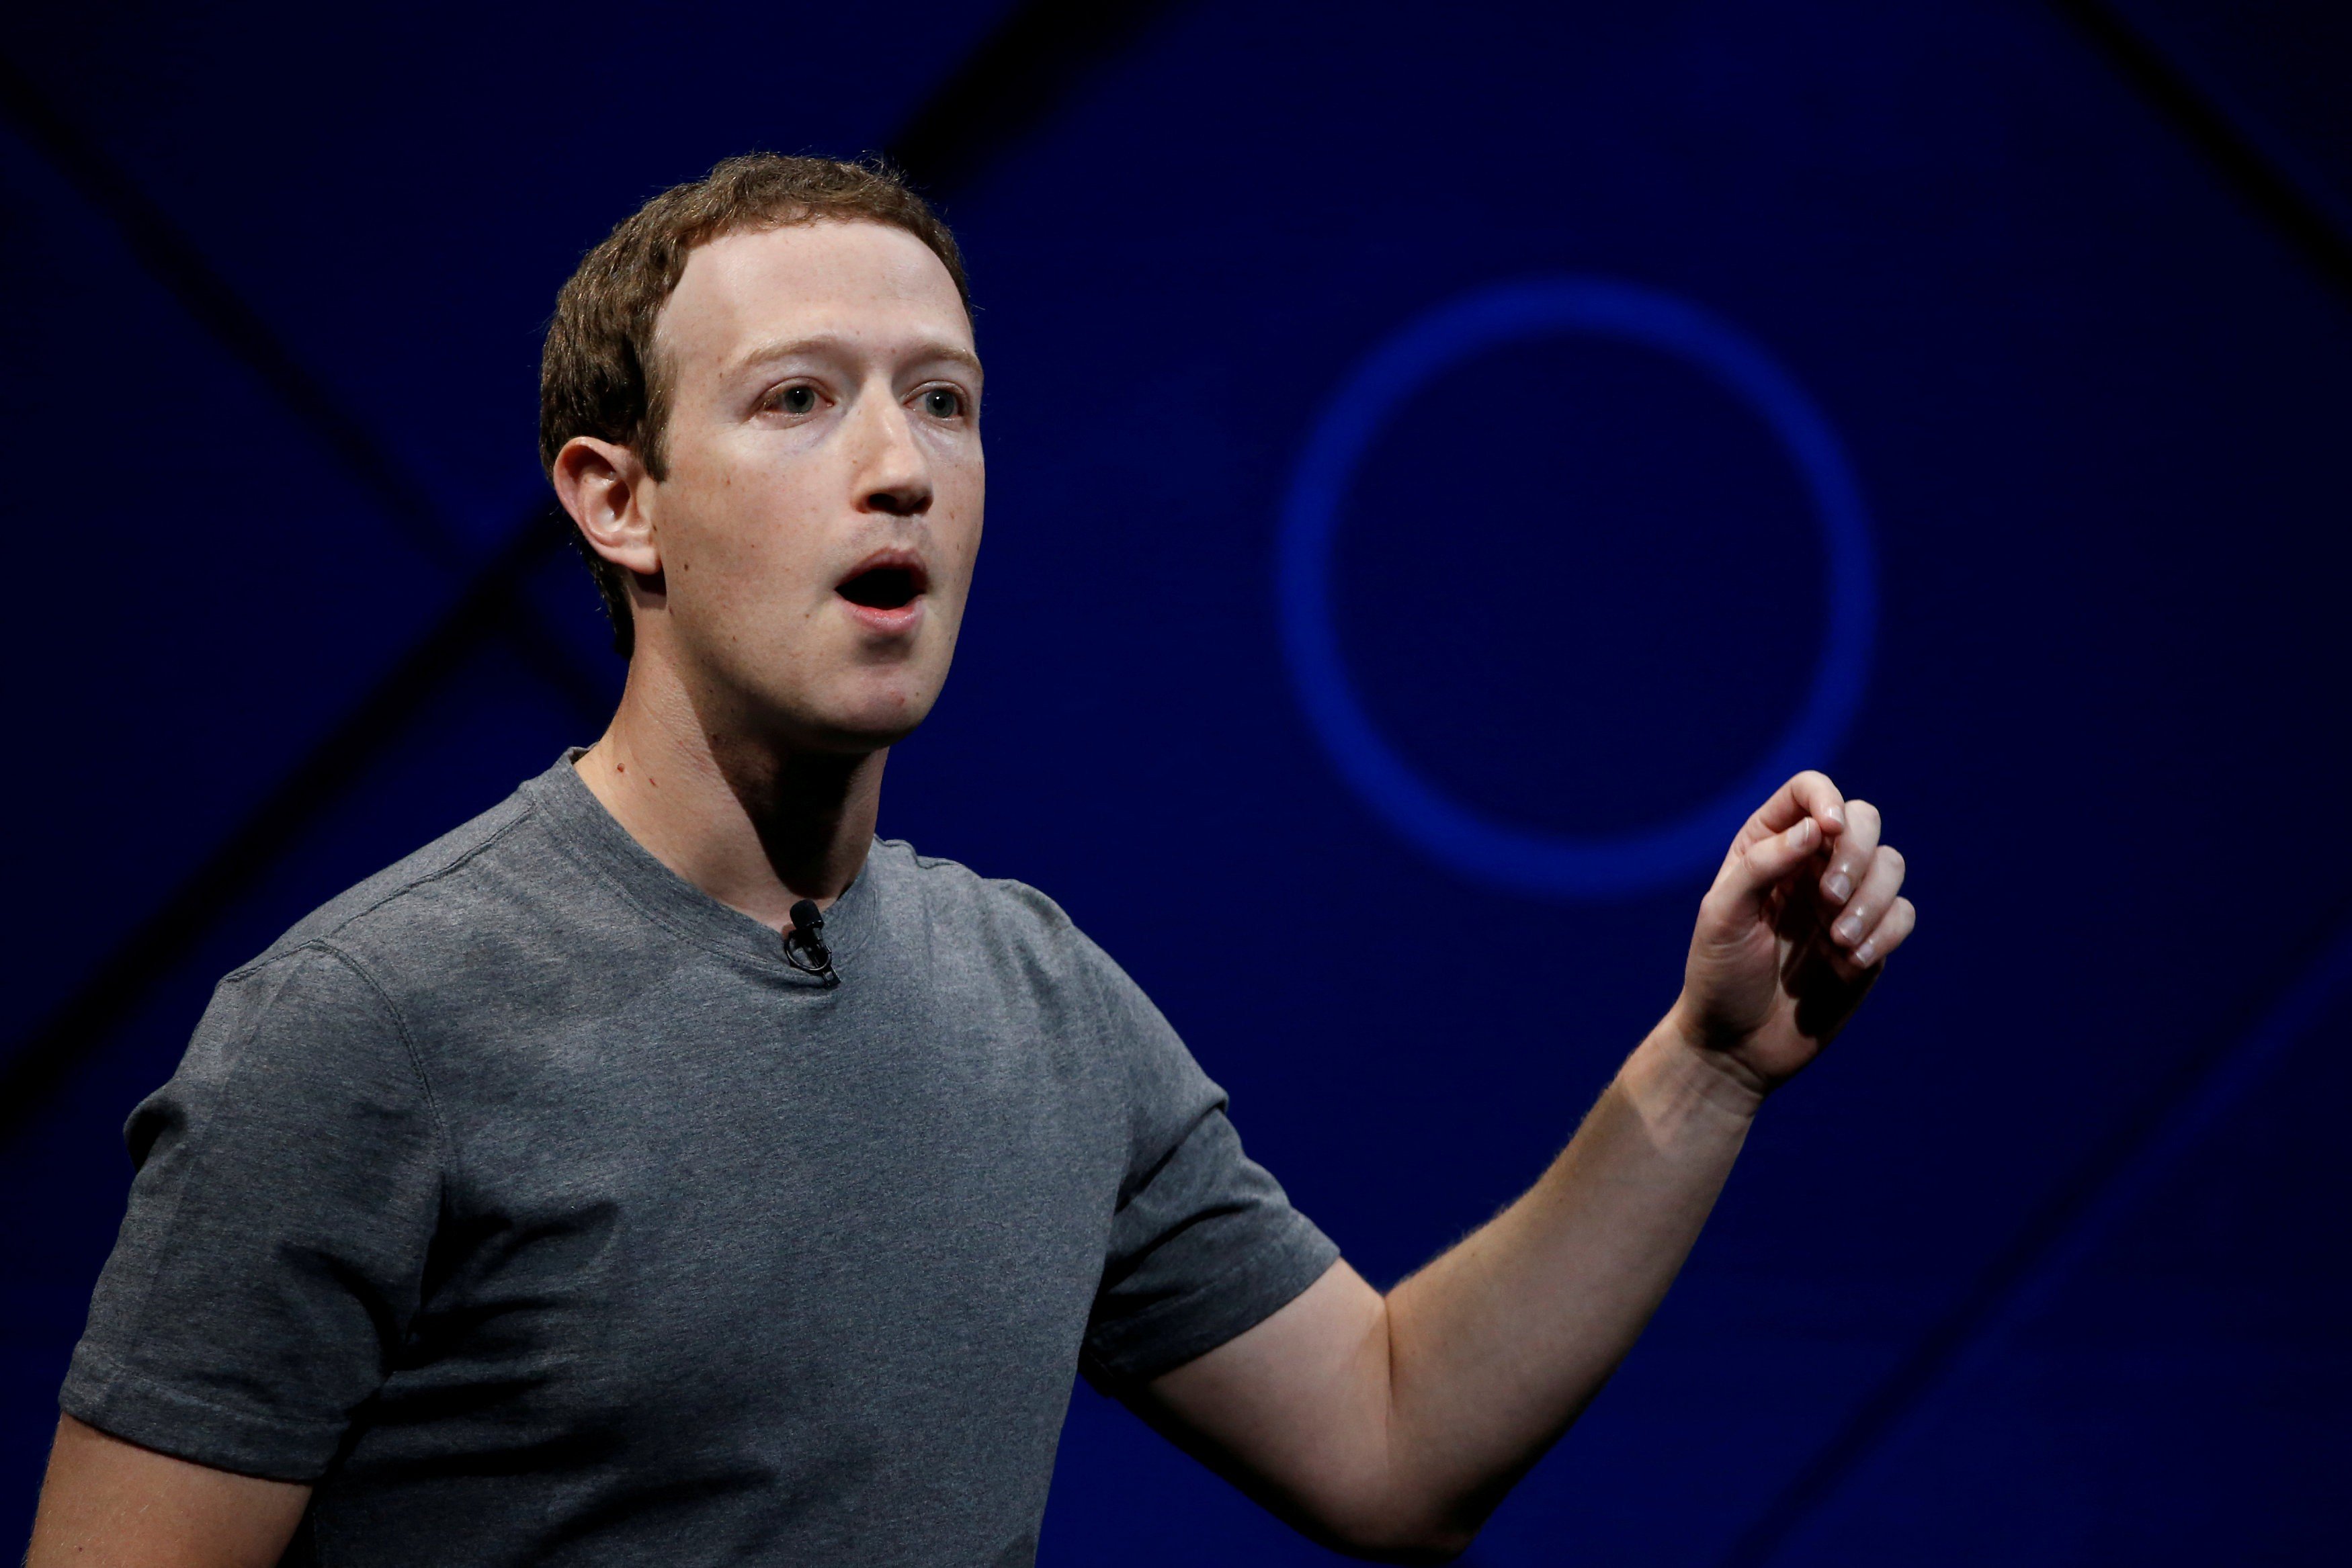 Facebook founder and CEO Mark Zuckerberg speaks on stage during the annual Facebook F8 developers conference in San Jose, California in April last year. Zuckerberg’s apologies and proposed solutions in the aftermath of the Cambridge Analytica debacle have done little to ease the concerns of the social network’s users. Photo: Reuters